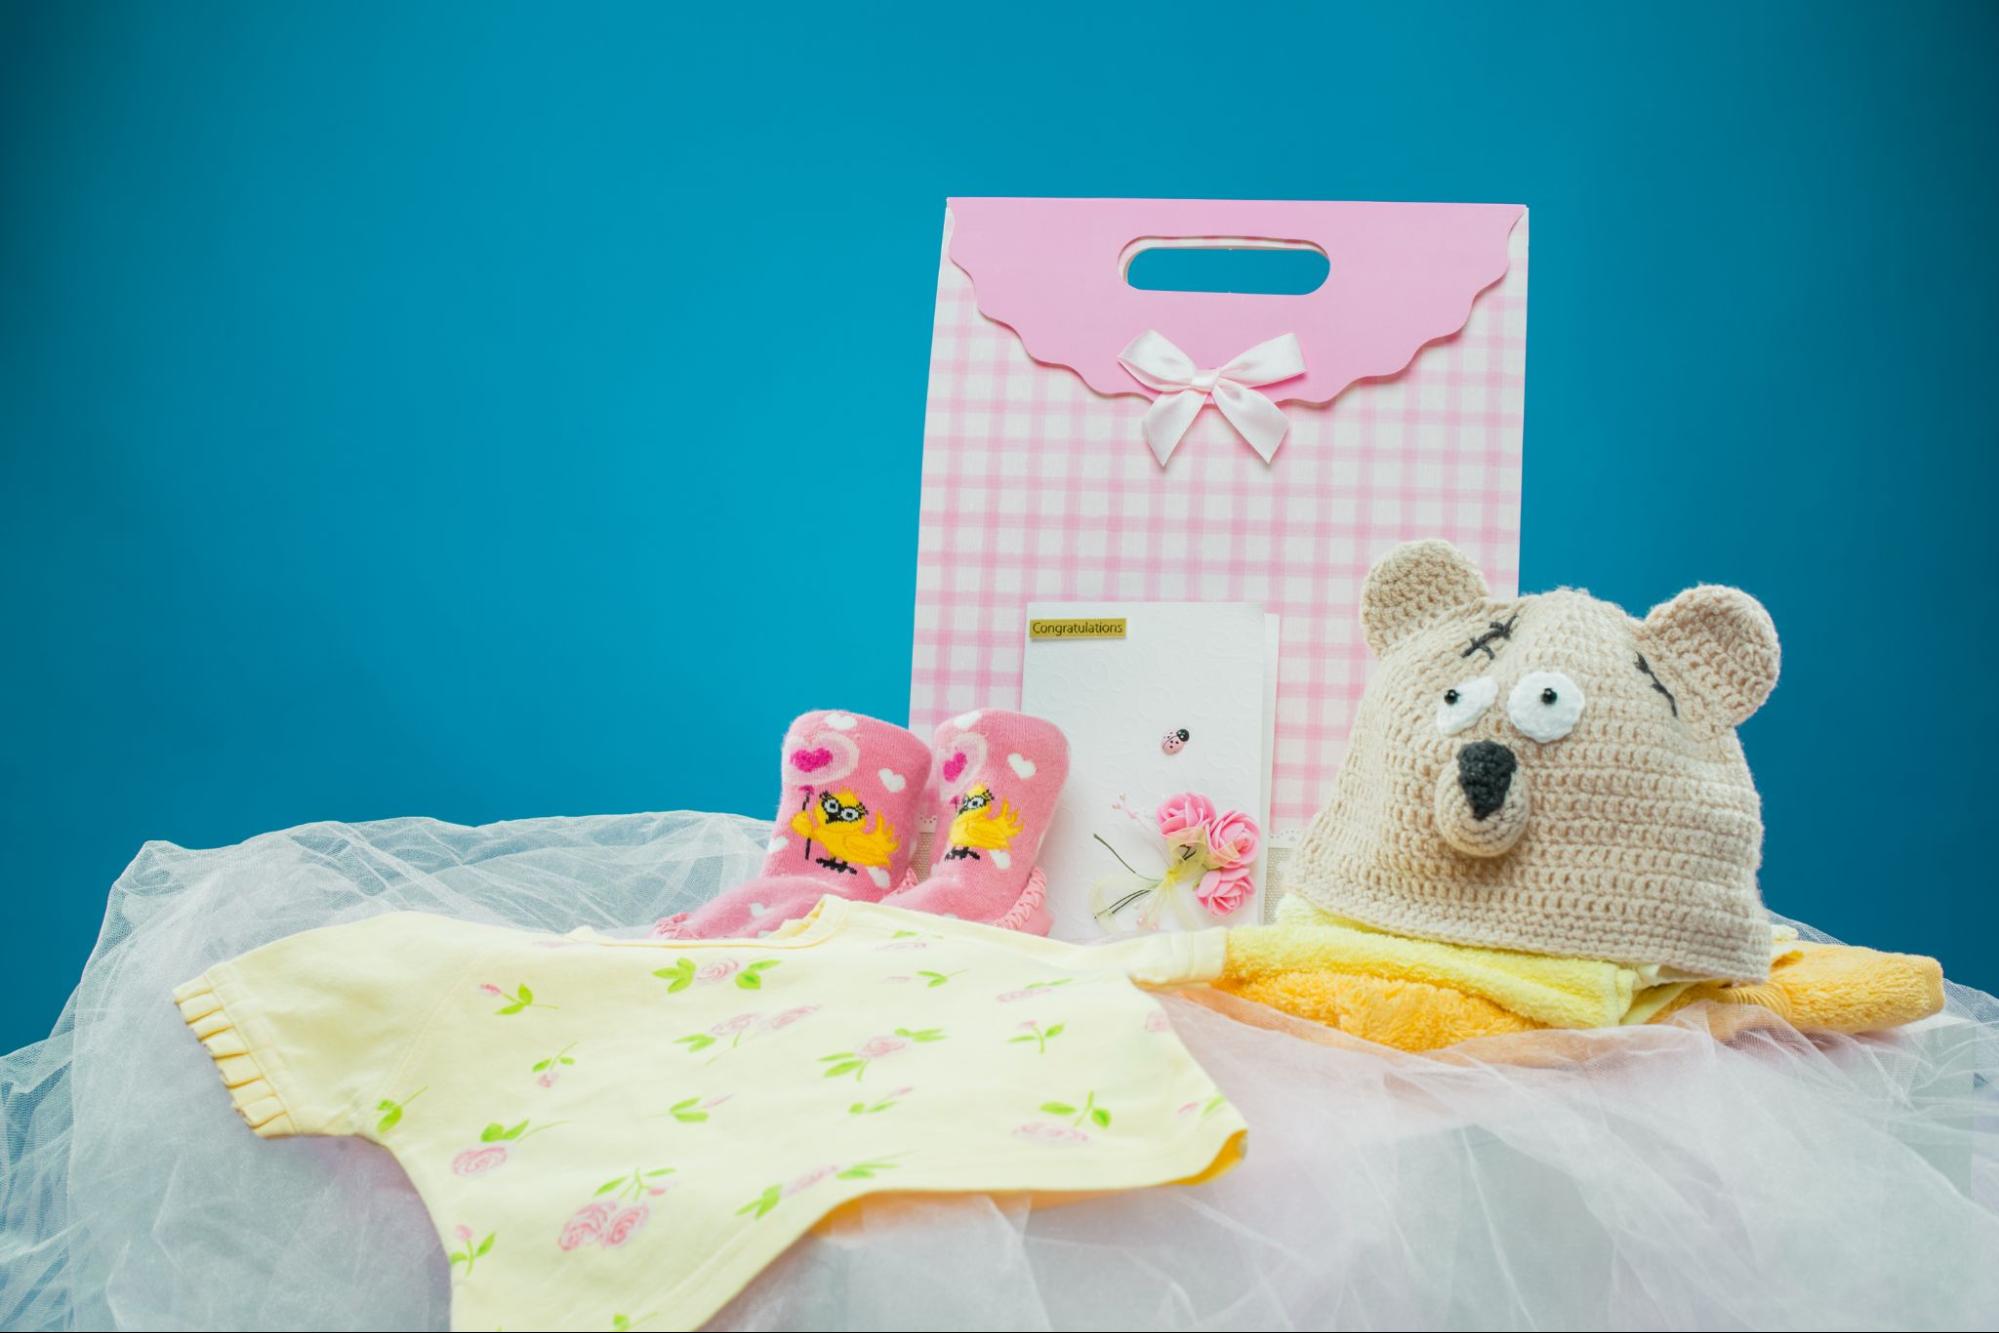 Baby shower gifts with a plush toy, pink booties, and a yellow onesie